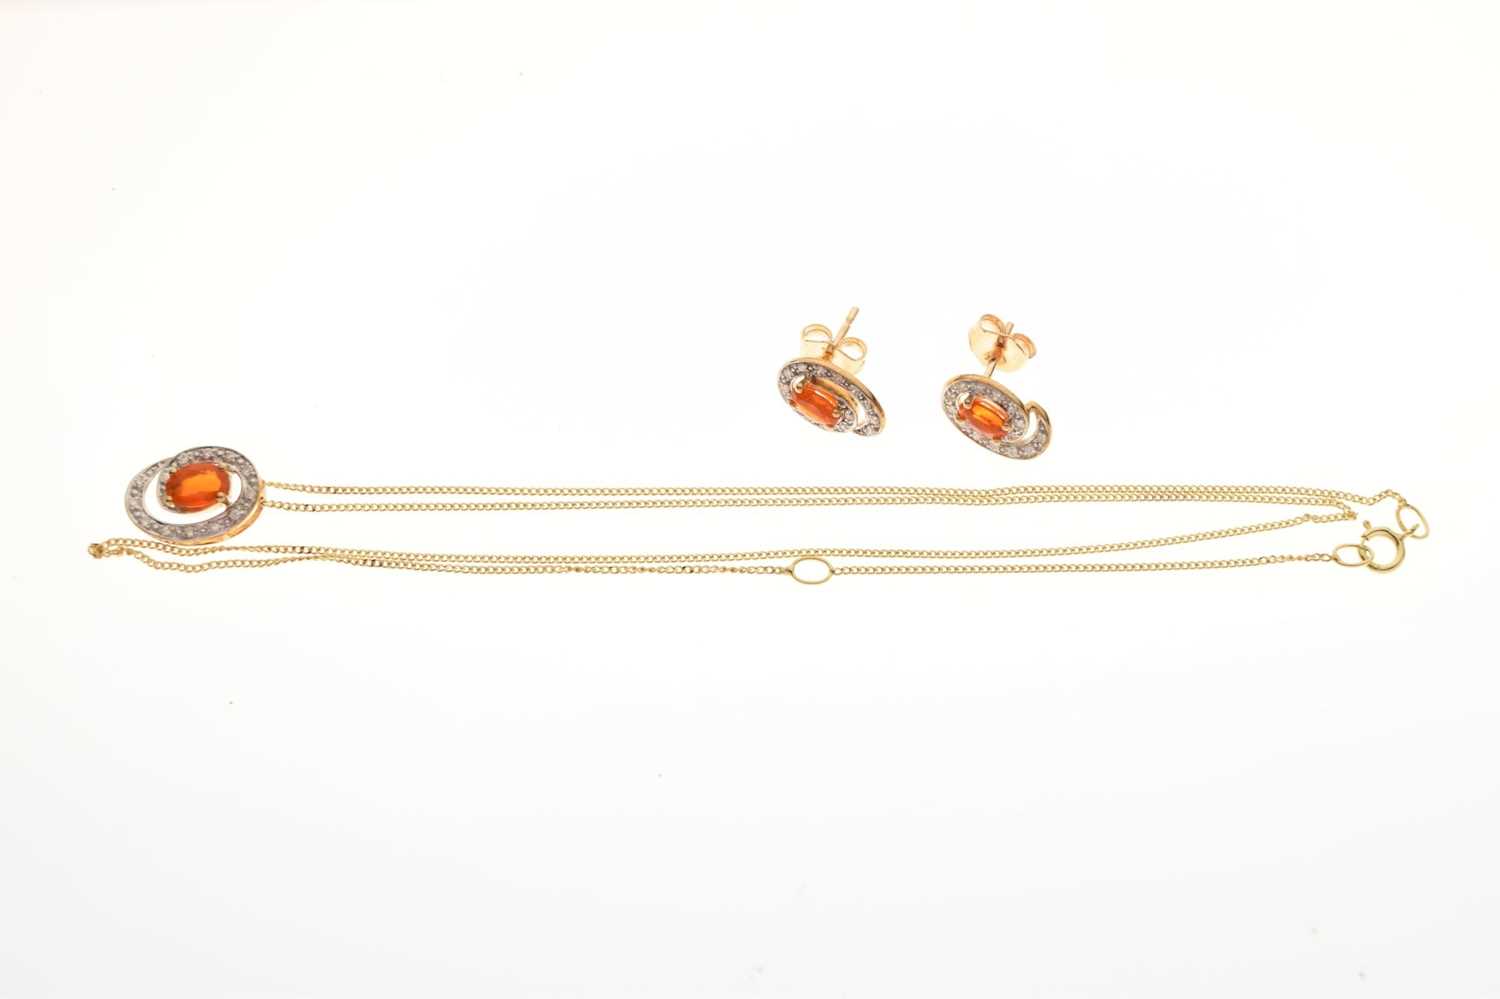 9ct gold fire opal pendant and earring set - Image 2 of 11